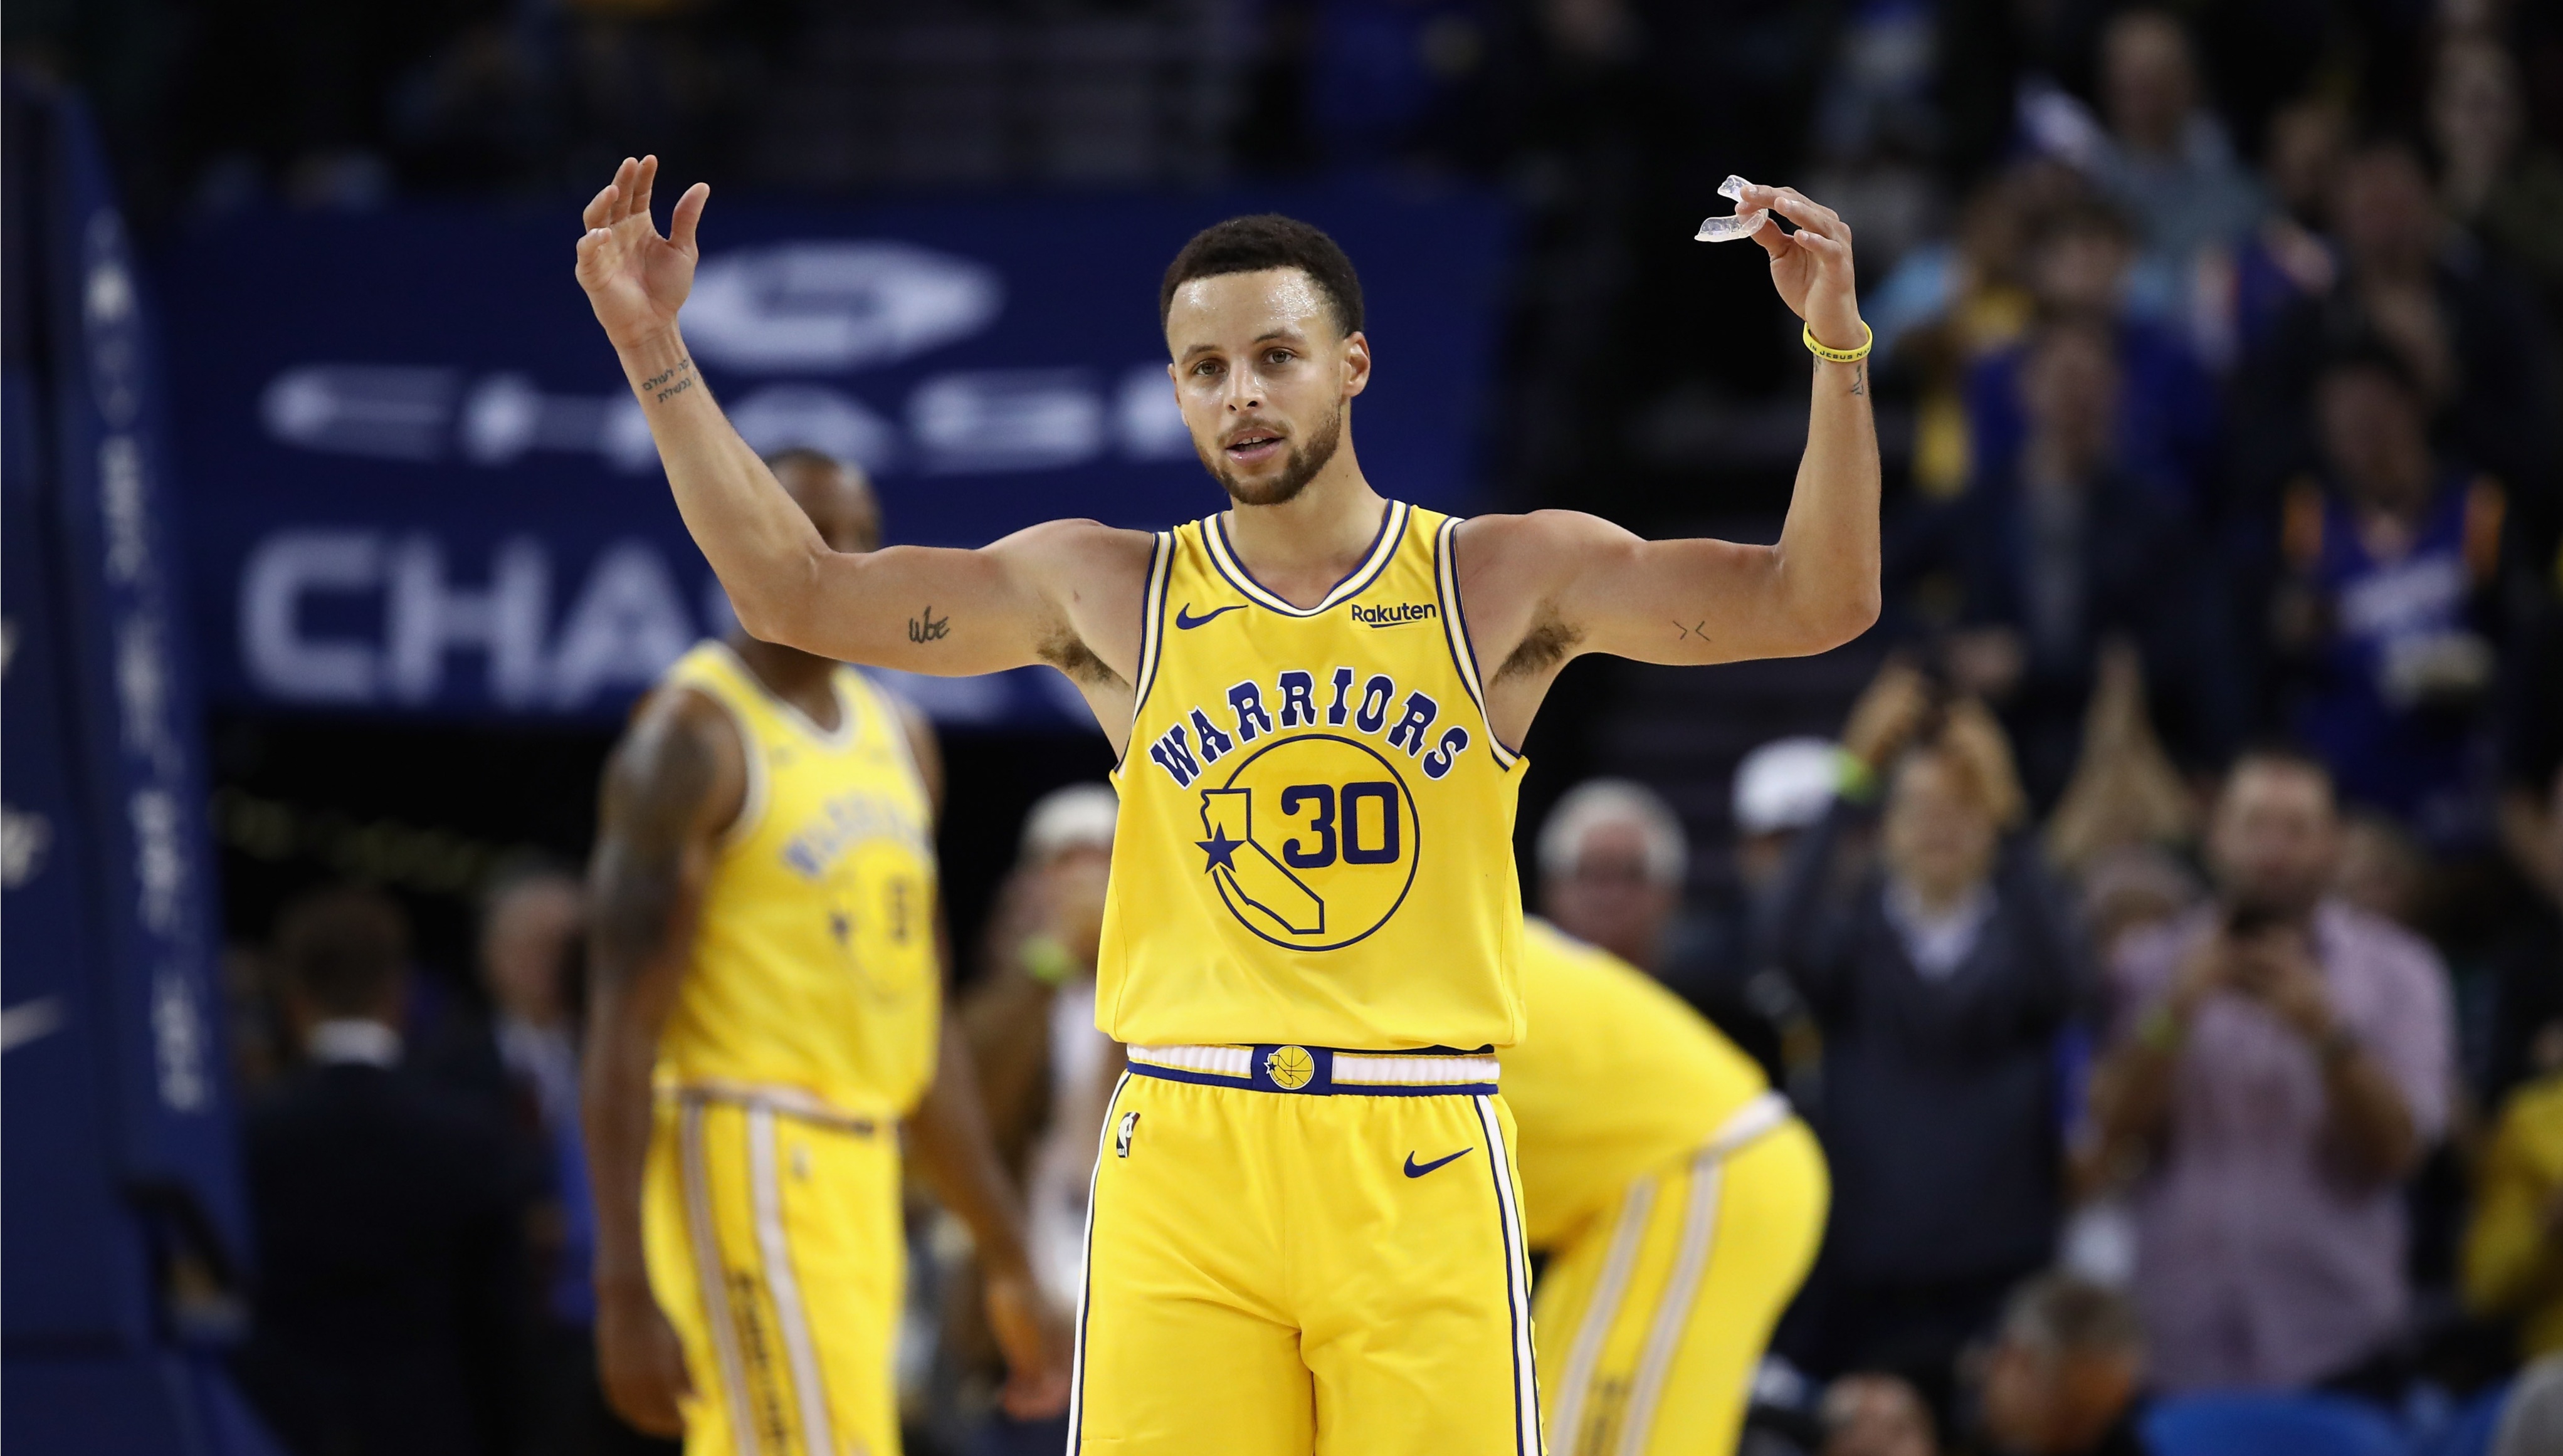 stephen curry in lakers jersey